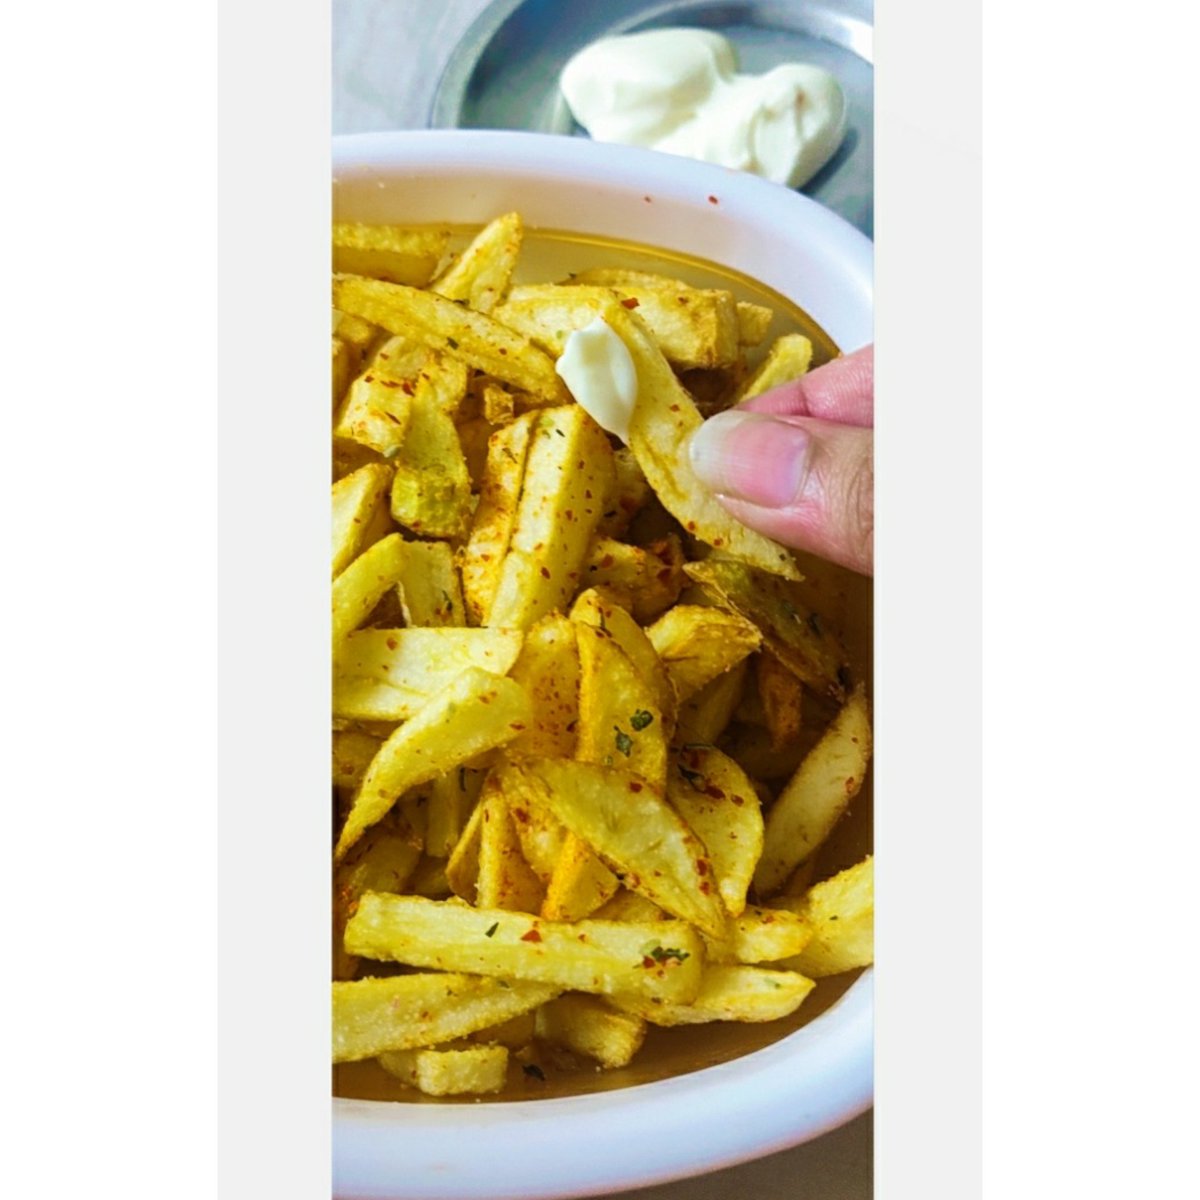 I wish I wanted abs as much as I want fries. 🍟

#frenchfries #fries #foodporn #foodie #foodphotography #fastfood #foodgasm #goodfood #foodlover #frieslover #frenchfrieslover #snack #foodies #craving #fryday #nationalfrenchfryday #Frenchfryday #funwithfries #friedfood #epicfood